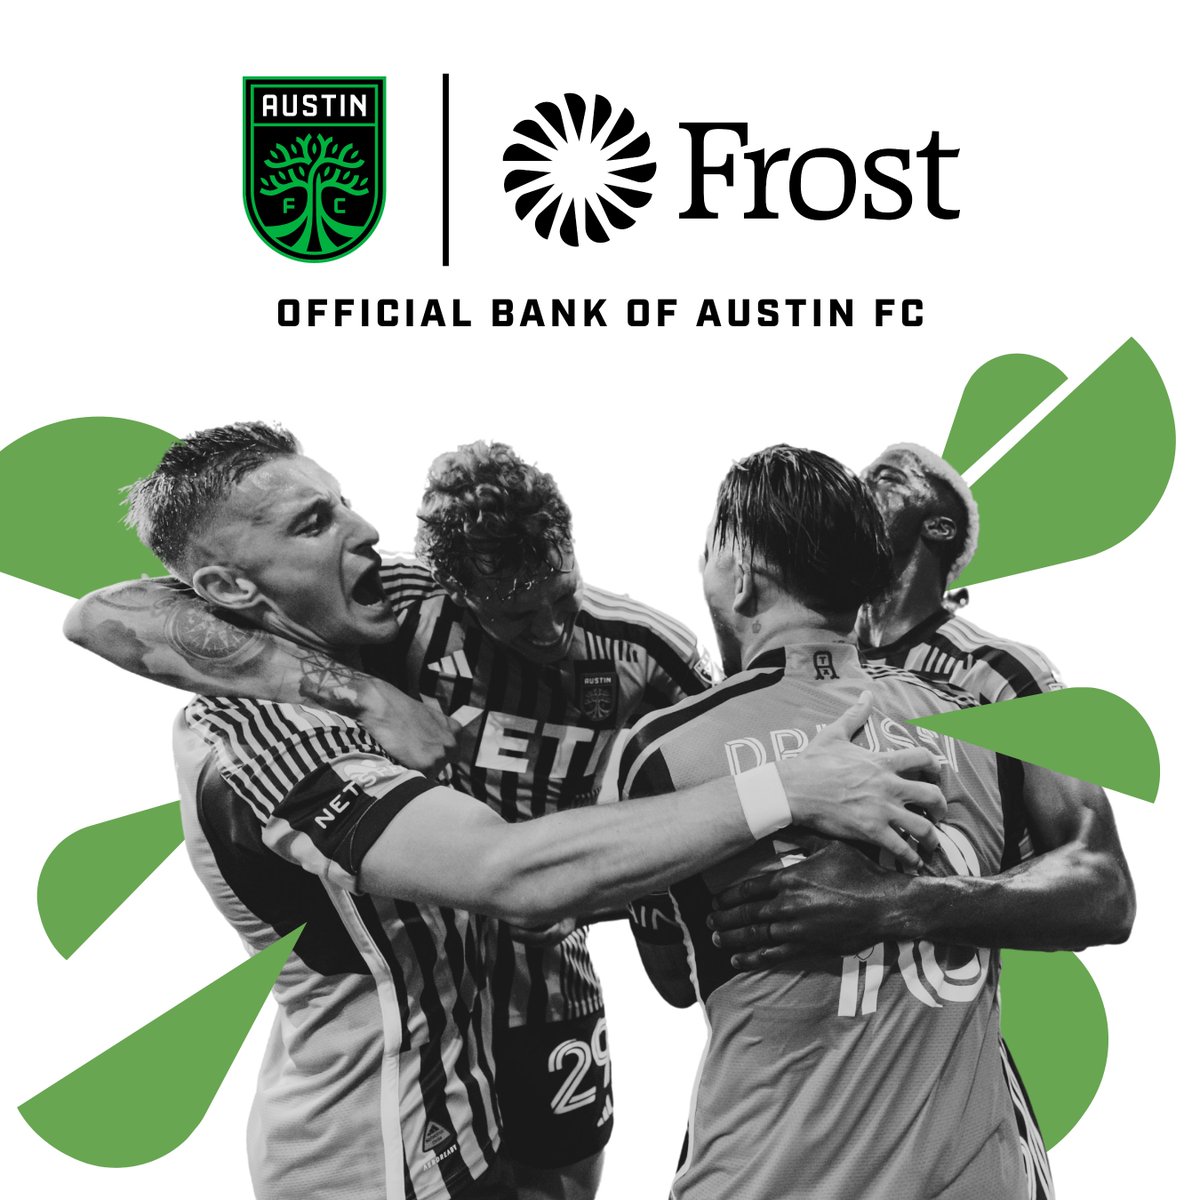 Goal! We are excited to announce that we have entered a multiyear partnership with @AustinFC, the premier Major League Soccer team of Central Texas, as the Official Bank of Austin FC! Learn more here: spr.ly/6016jI32j #ExactlyWhatYouUnexpected #GrowTheLegend